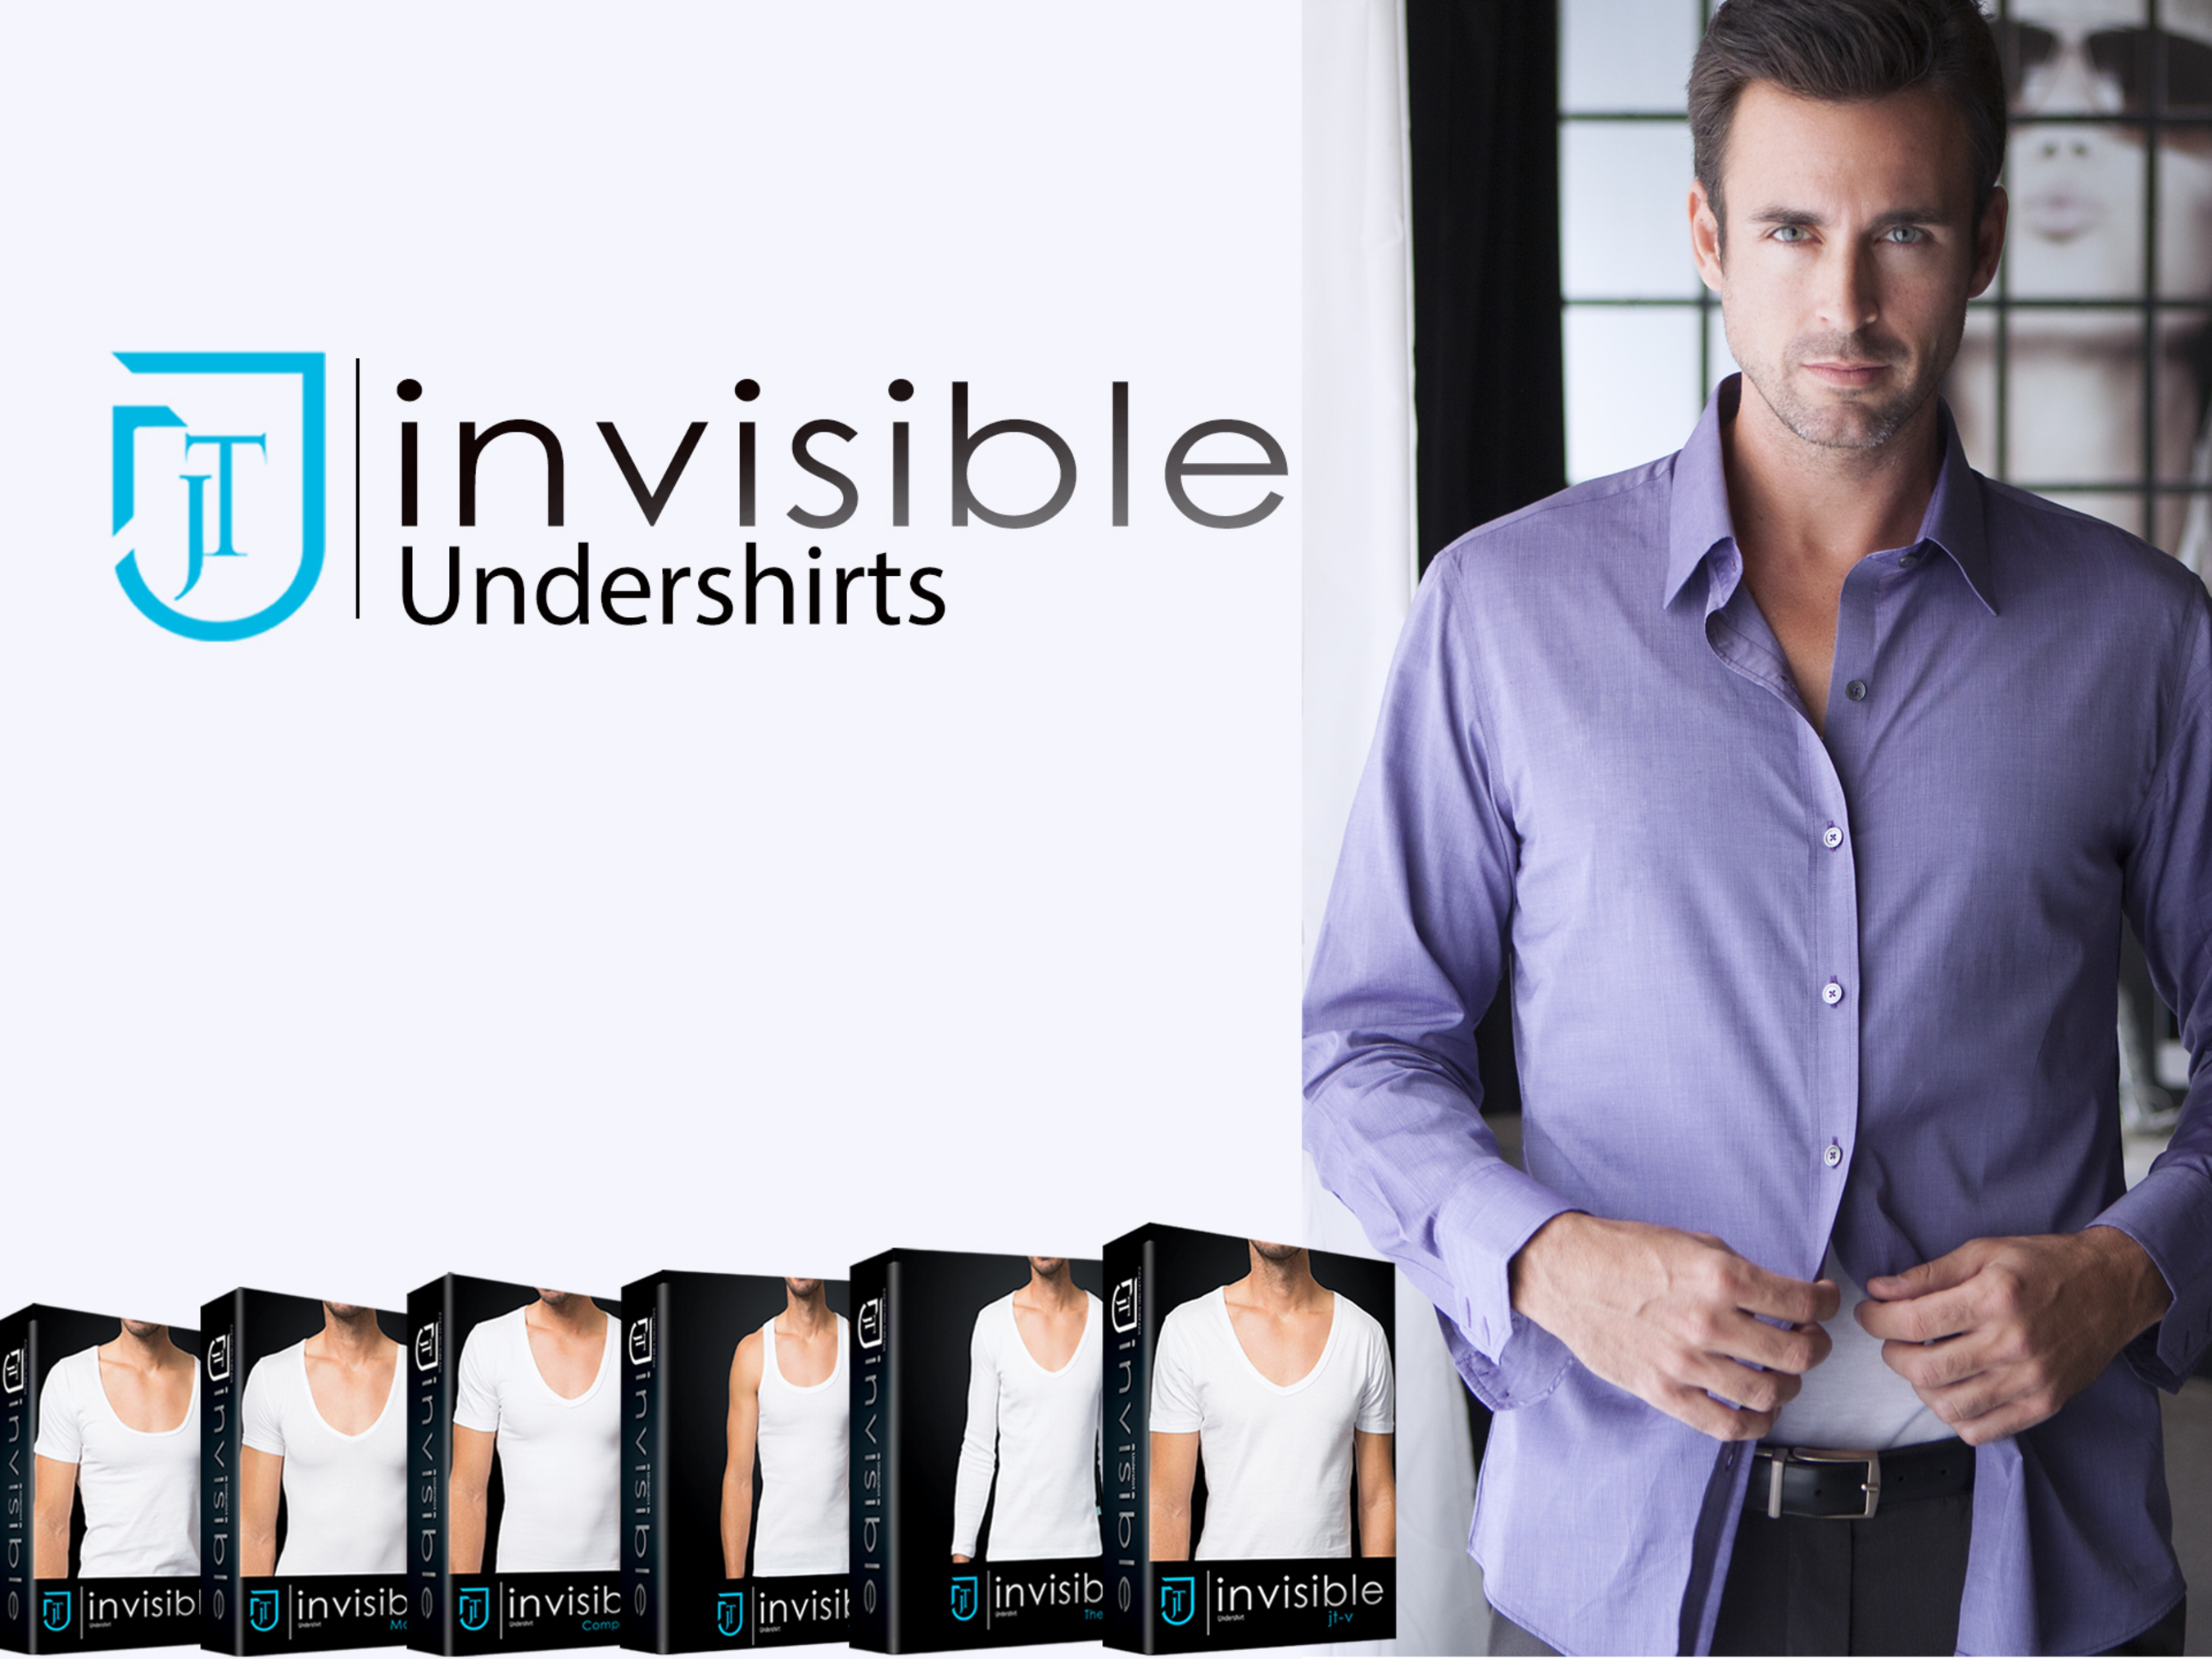 jT Invisible Undershirts from Collected Threads. Company aims to improve men's fashion with a subtle change to their wardrobe (PRNewsFoto/Collected Threads, Inc.)